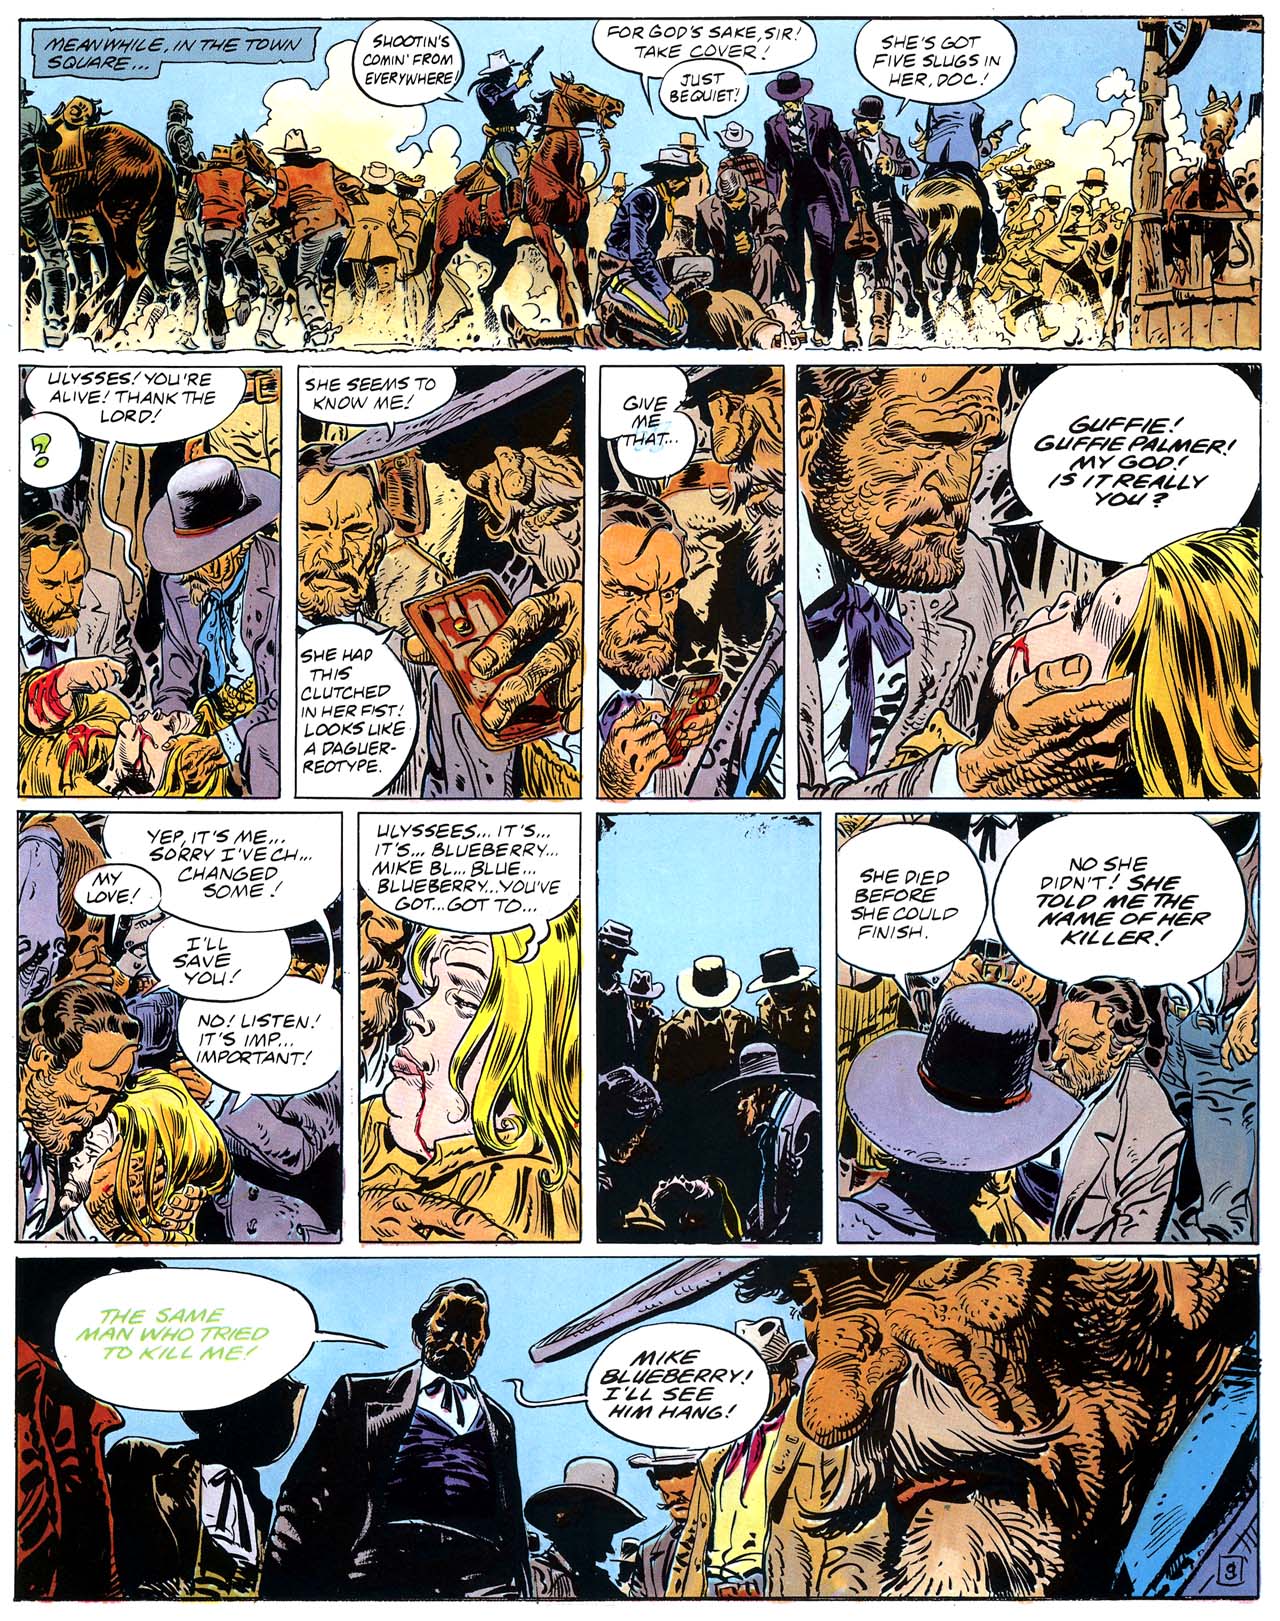 Read online Epic Graphic Novel: Blueberry comic -  Issue #3 - 14